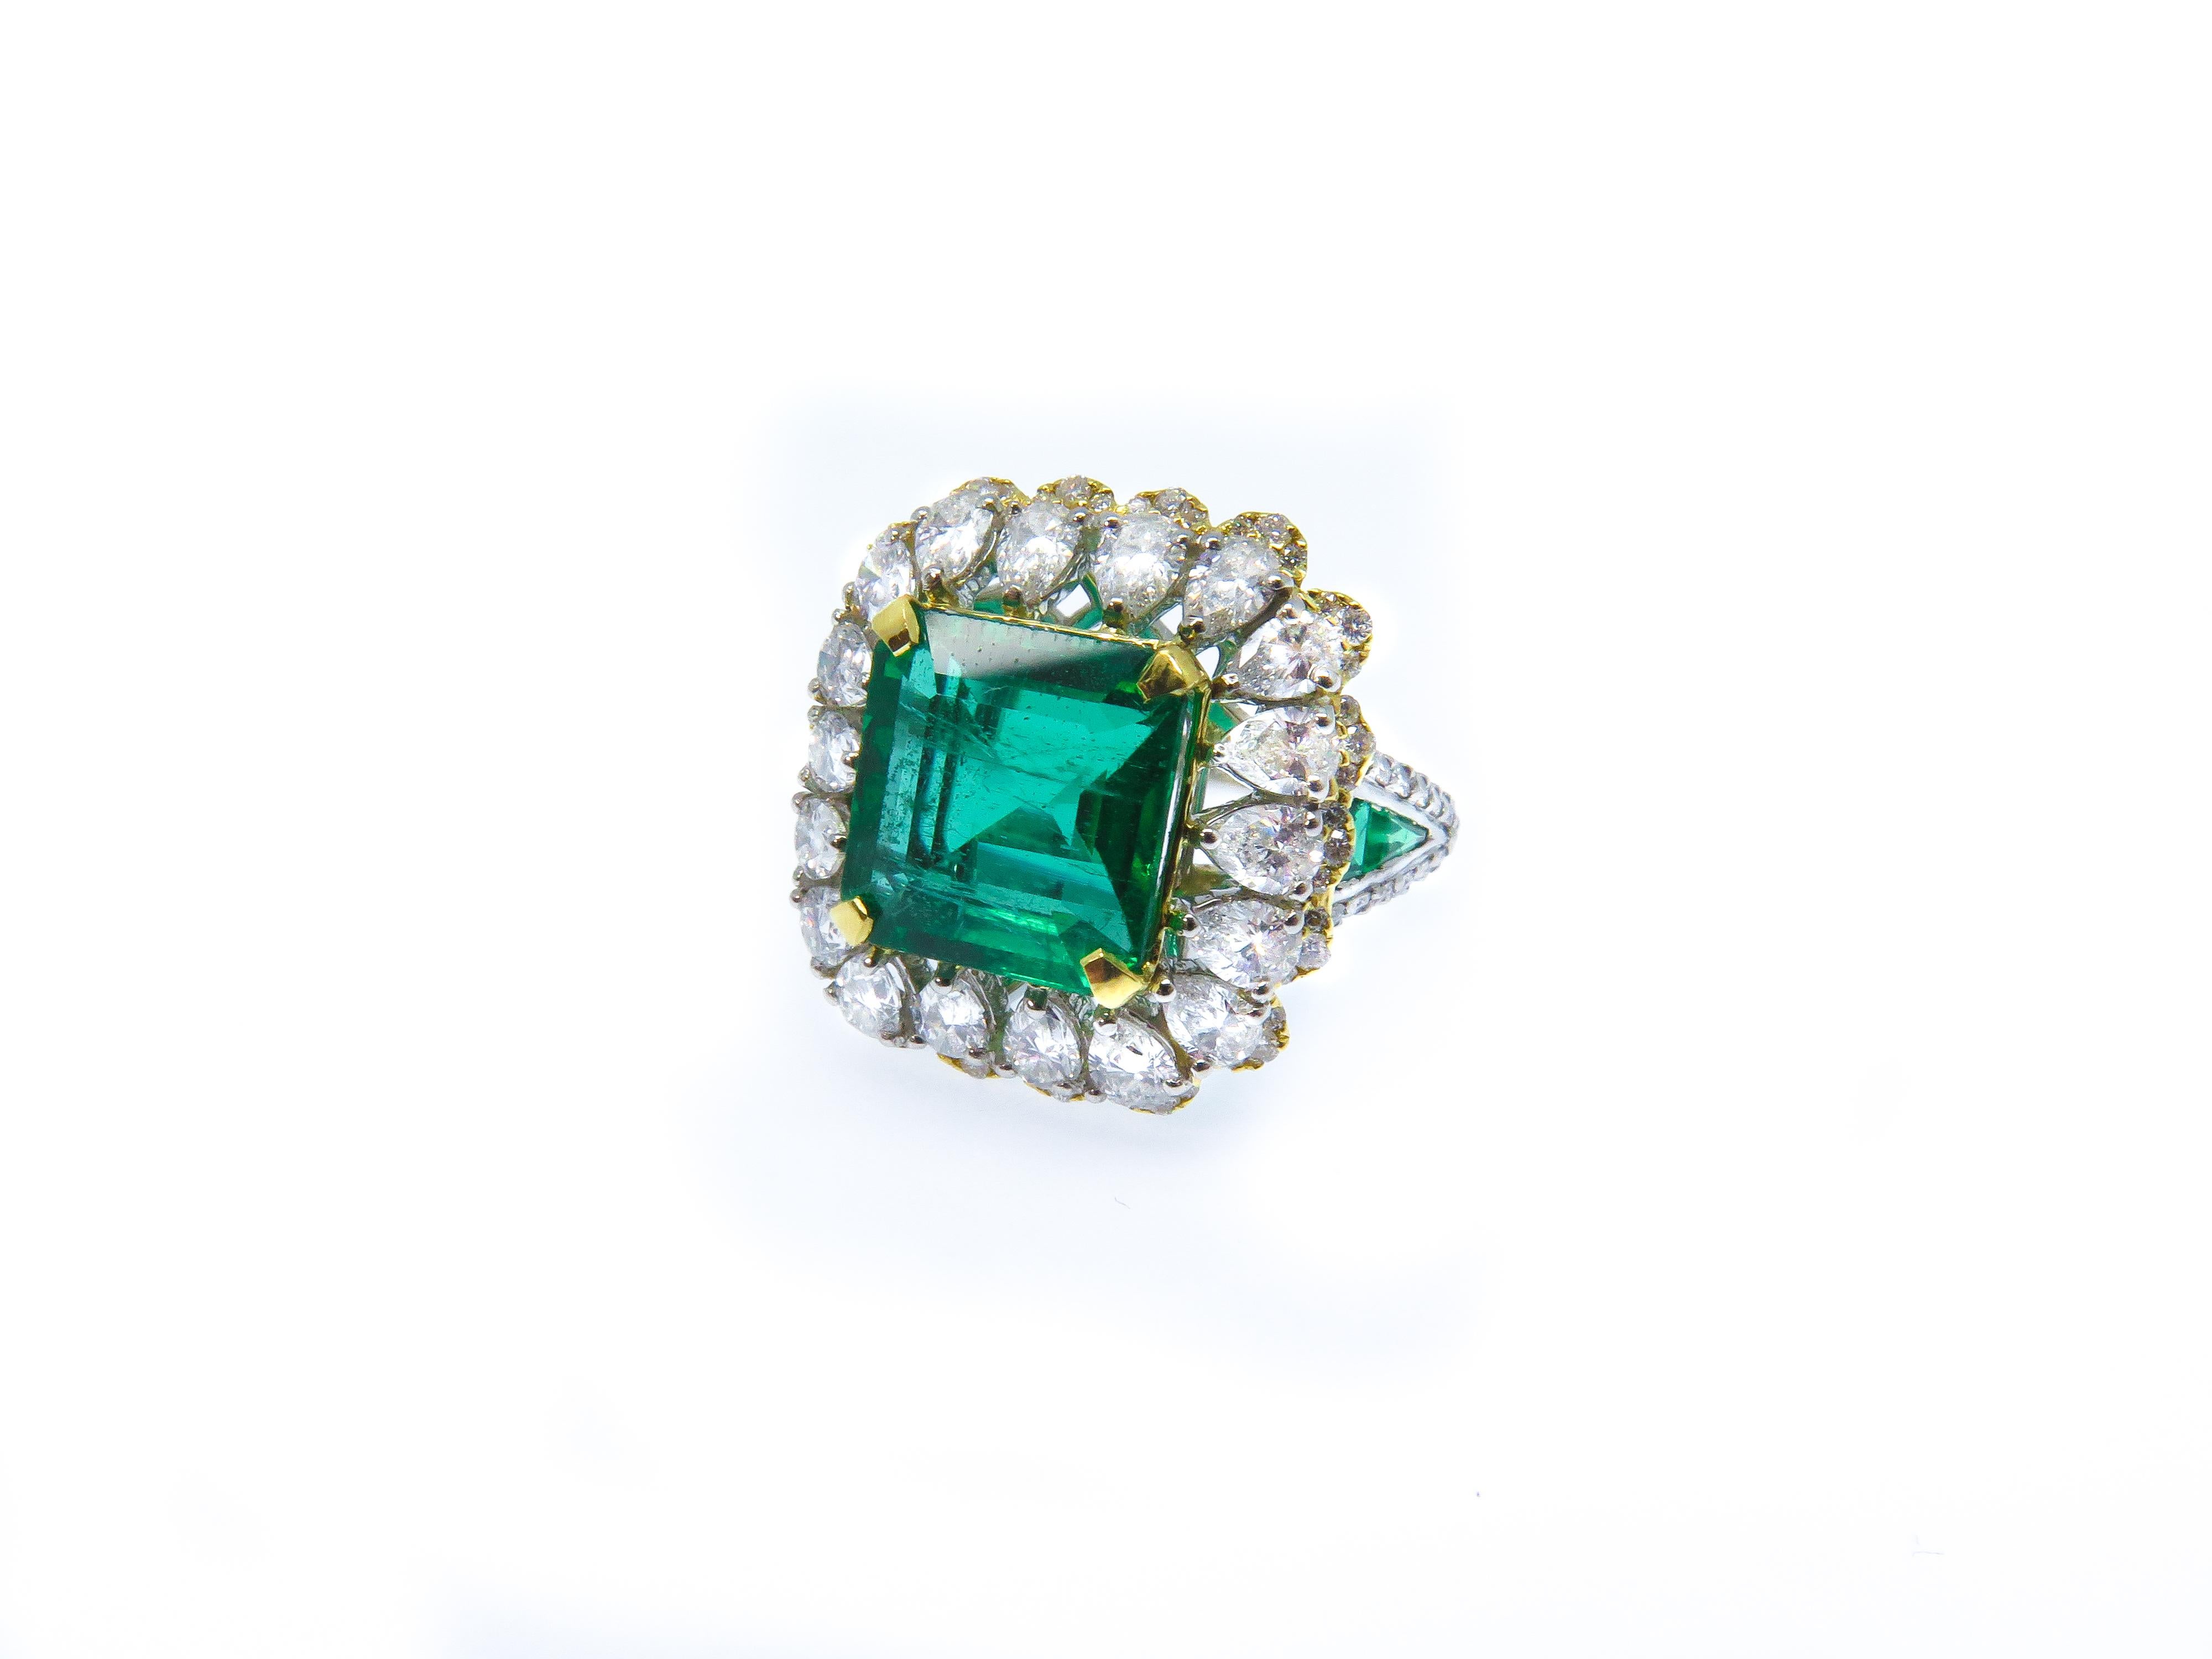 Emerald is highly valued for its deep bright green color, transparency and rather high hardness. It has maintained, along with diamond and ruby, the dominant position among gemstones since ancient times.

This unique ring features a 5.18 carat